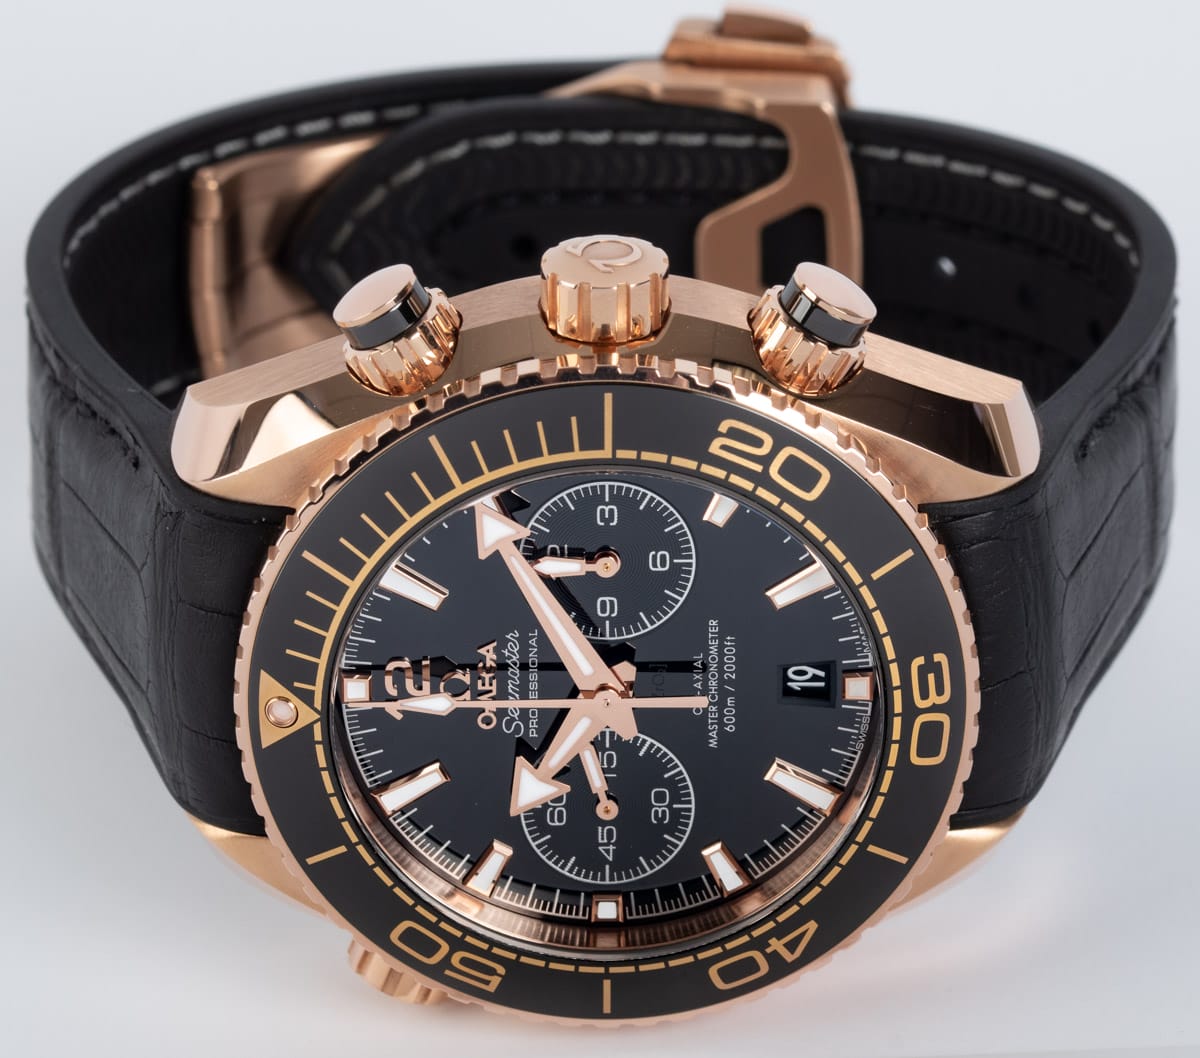 Front View of Seamaster Planet Ocean Chronograph